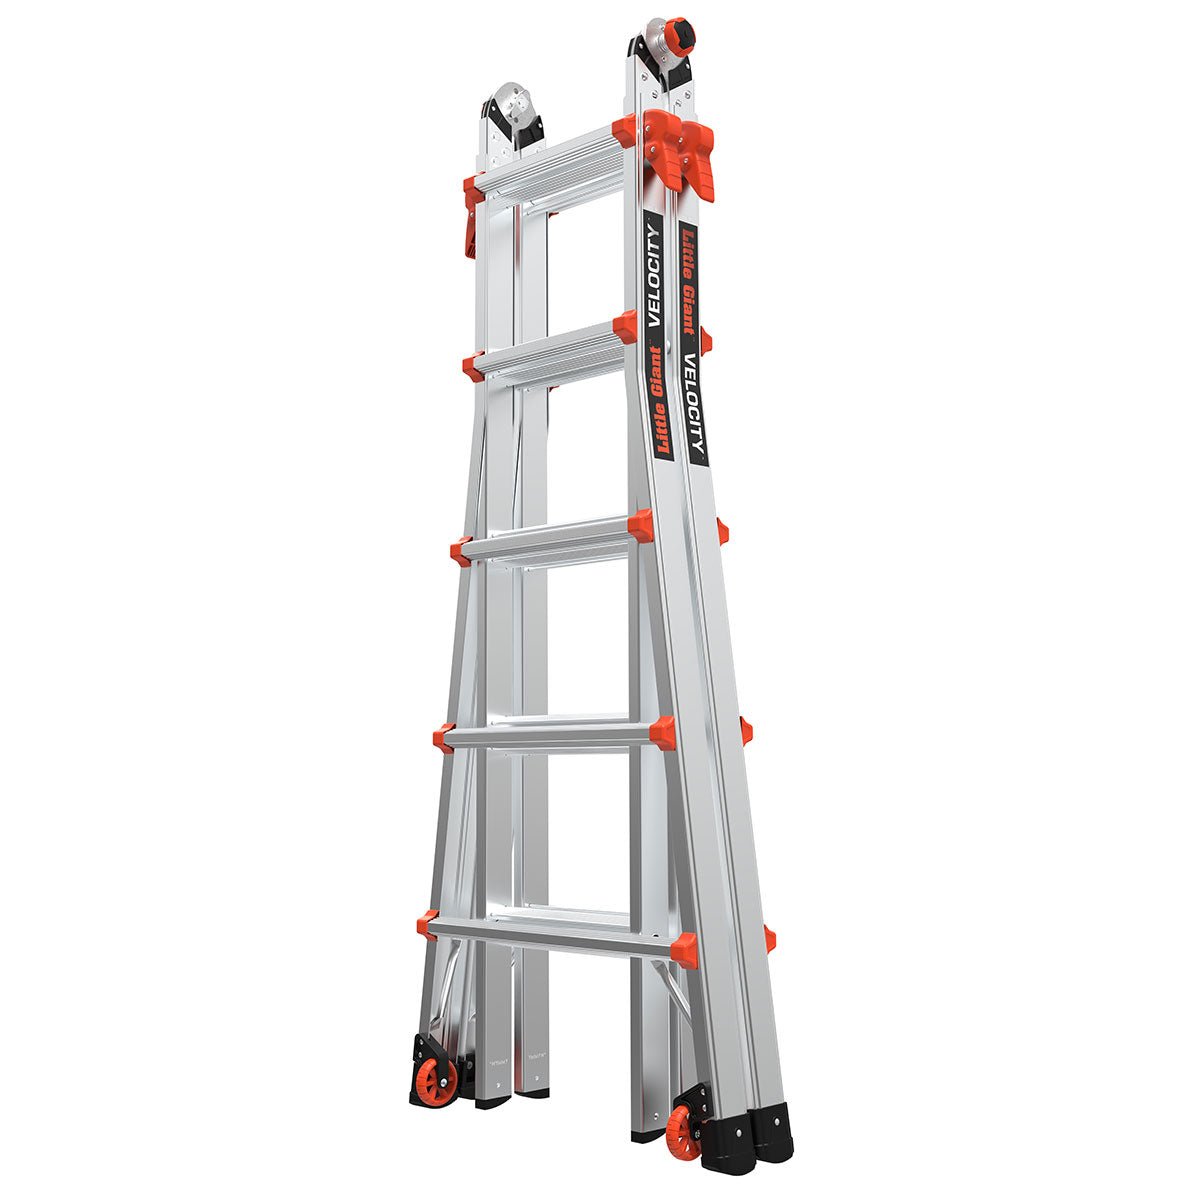 Little Giant 15422-303 - VELOCITY, Model 22 - CSA Grade IA - 300 lb/136 kg Rated, Aluminum Articulated Extendable Ladder